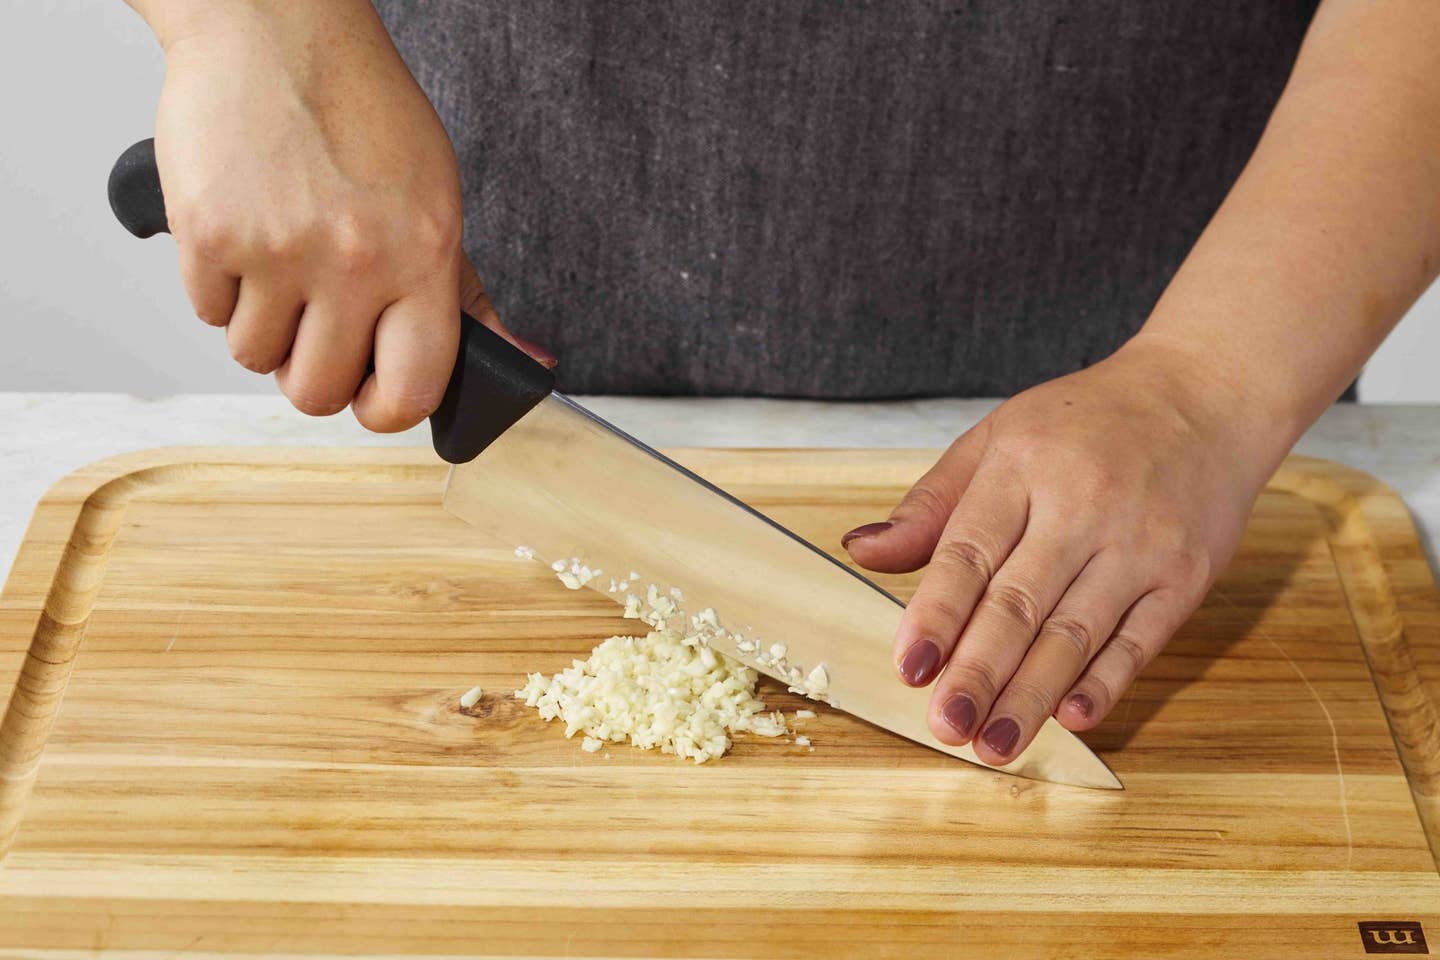 Knife Skills for Beginners: A Visual Guide to Slicing, Dicing, and More